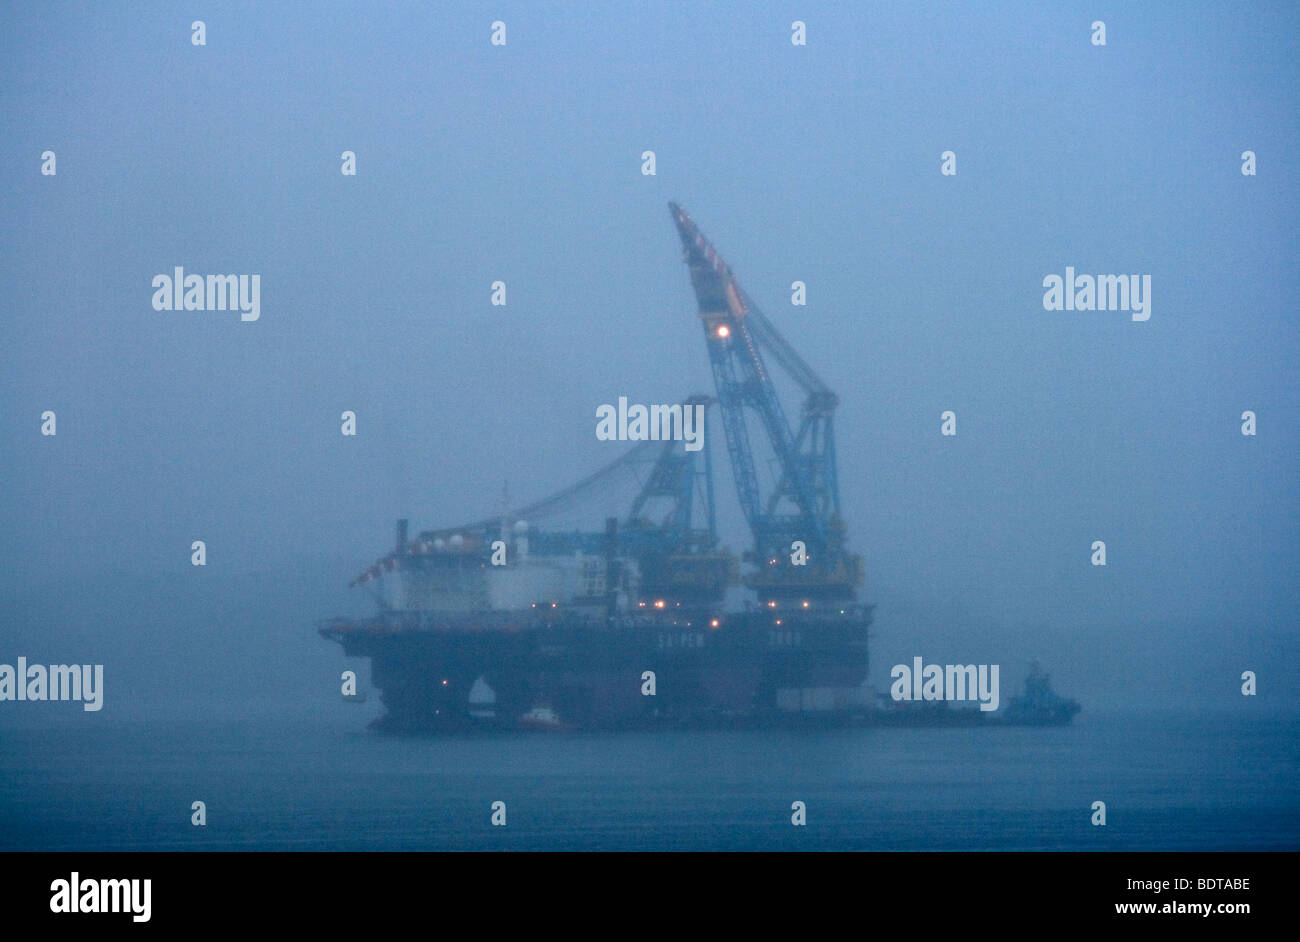 Oil or gas rig in the evening mist off Stavanger Stock Photo